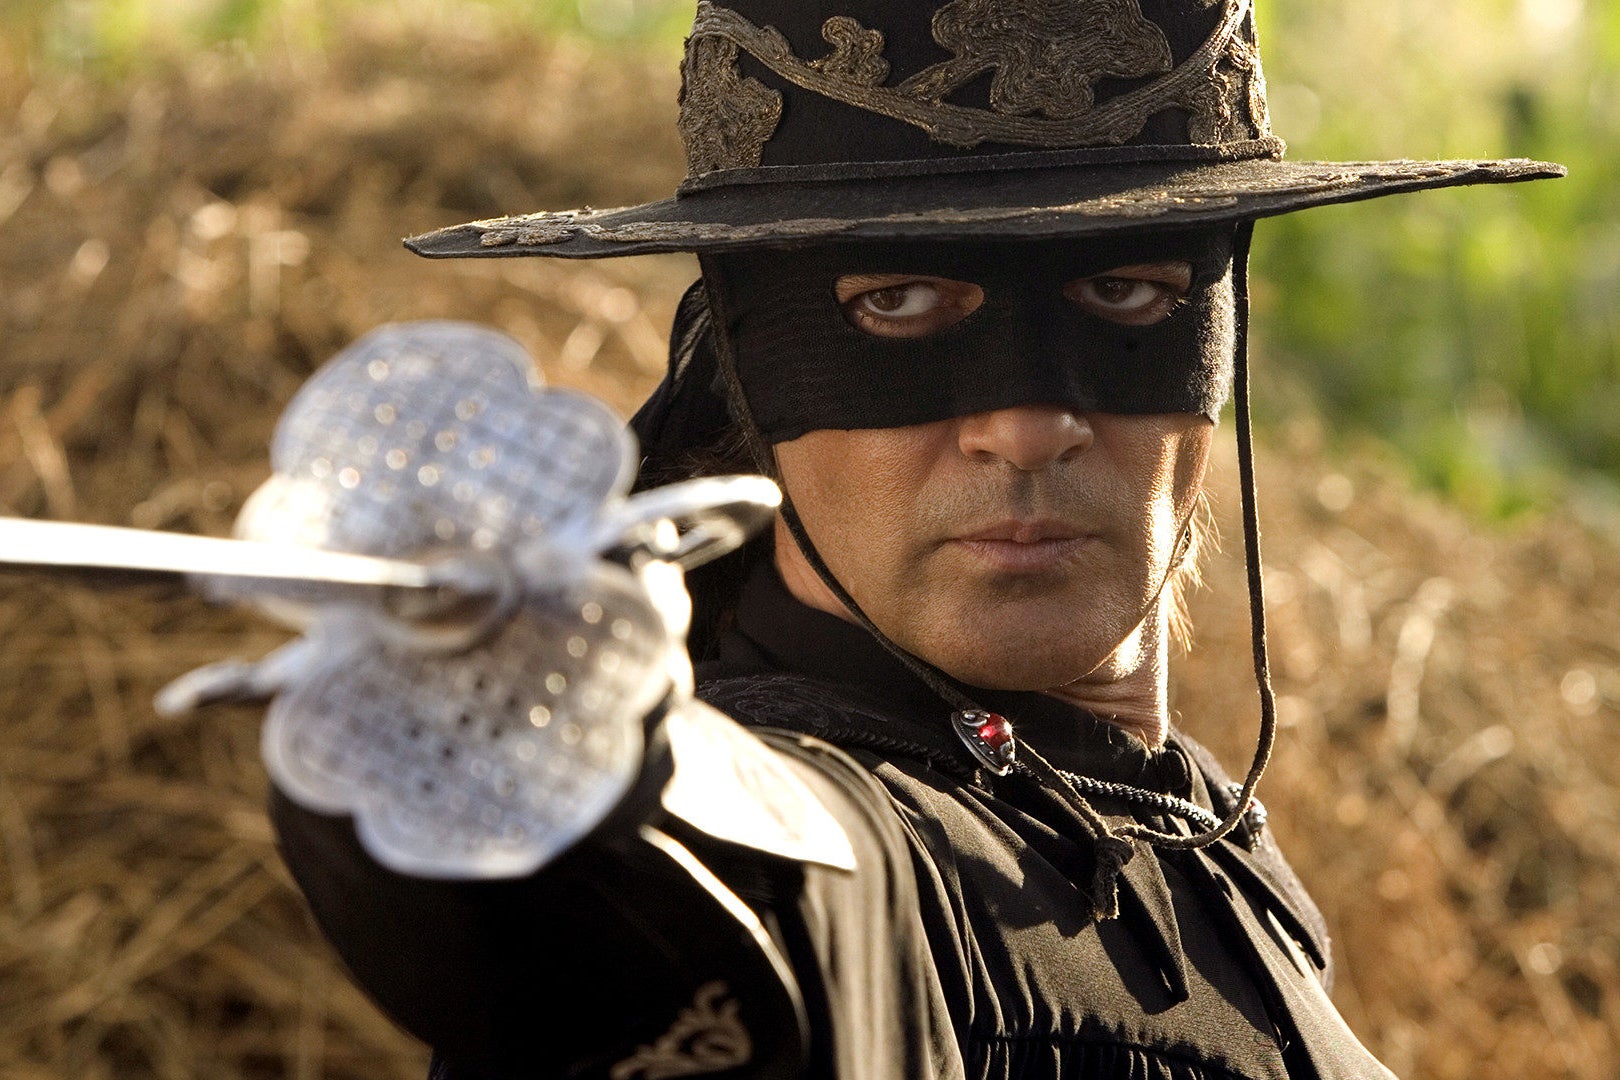 A straightfaced man dressed in a black cloak, a black mask that covers the upper half of his face (showing only his eyes and lower face), and embroidered black hat with a large brim, faces someone slightly off camera and points a silver sword in their direction. 